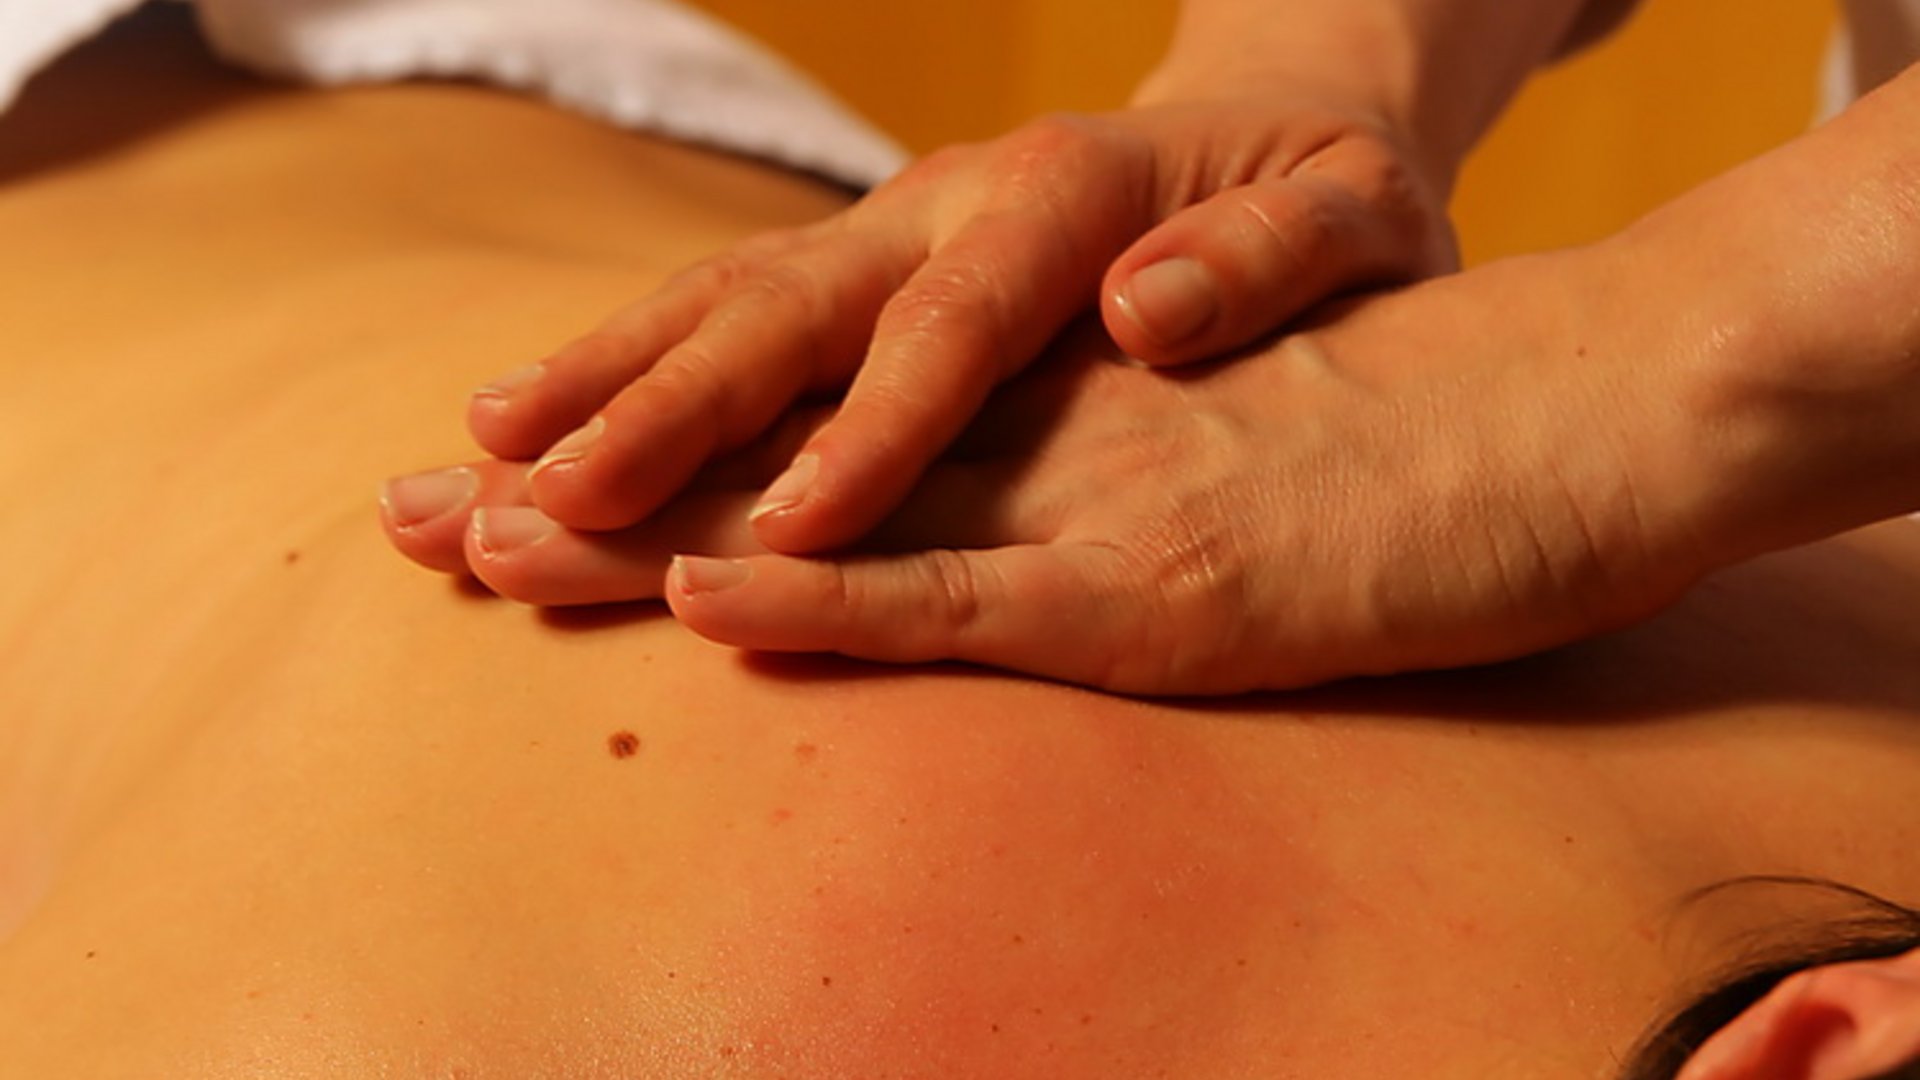 Hotel in Zillertal with 4 stars: massages